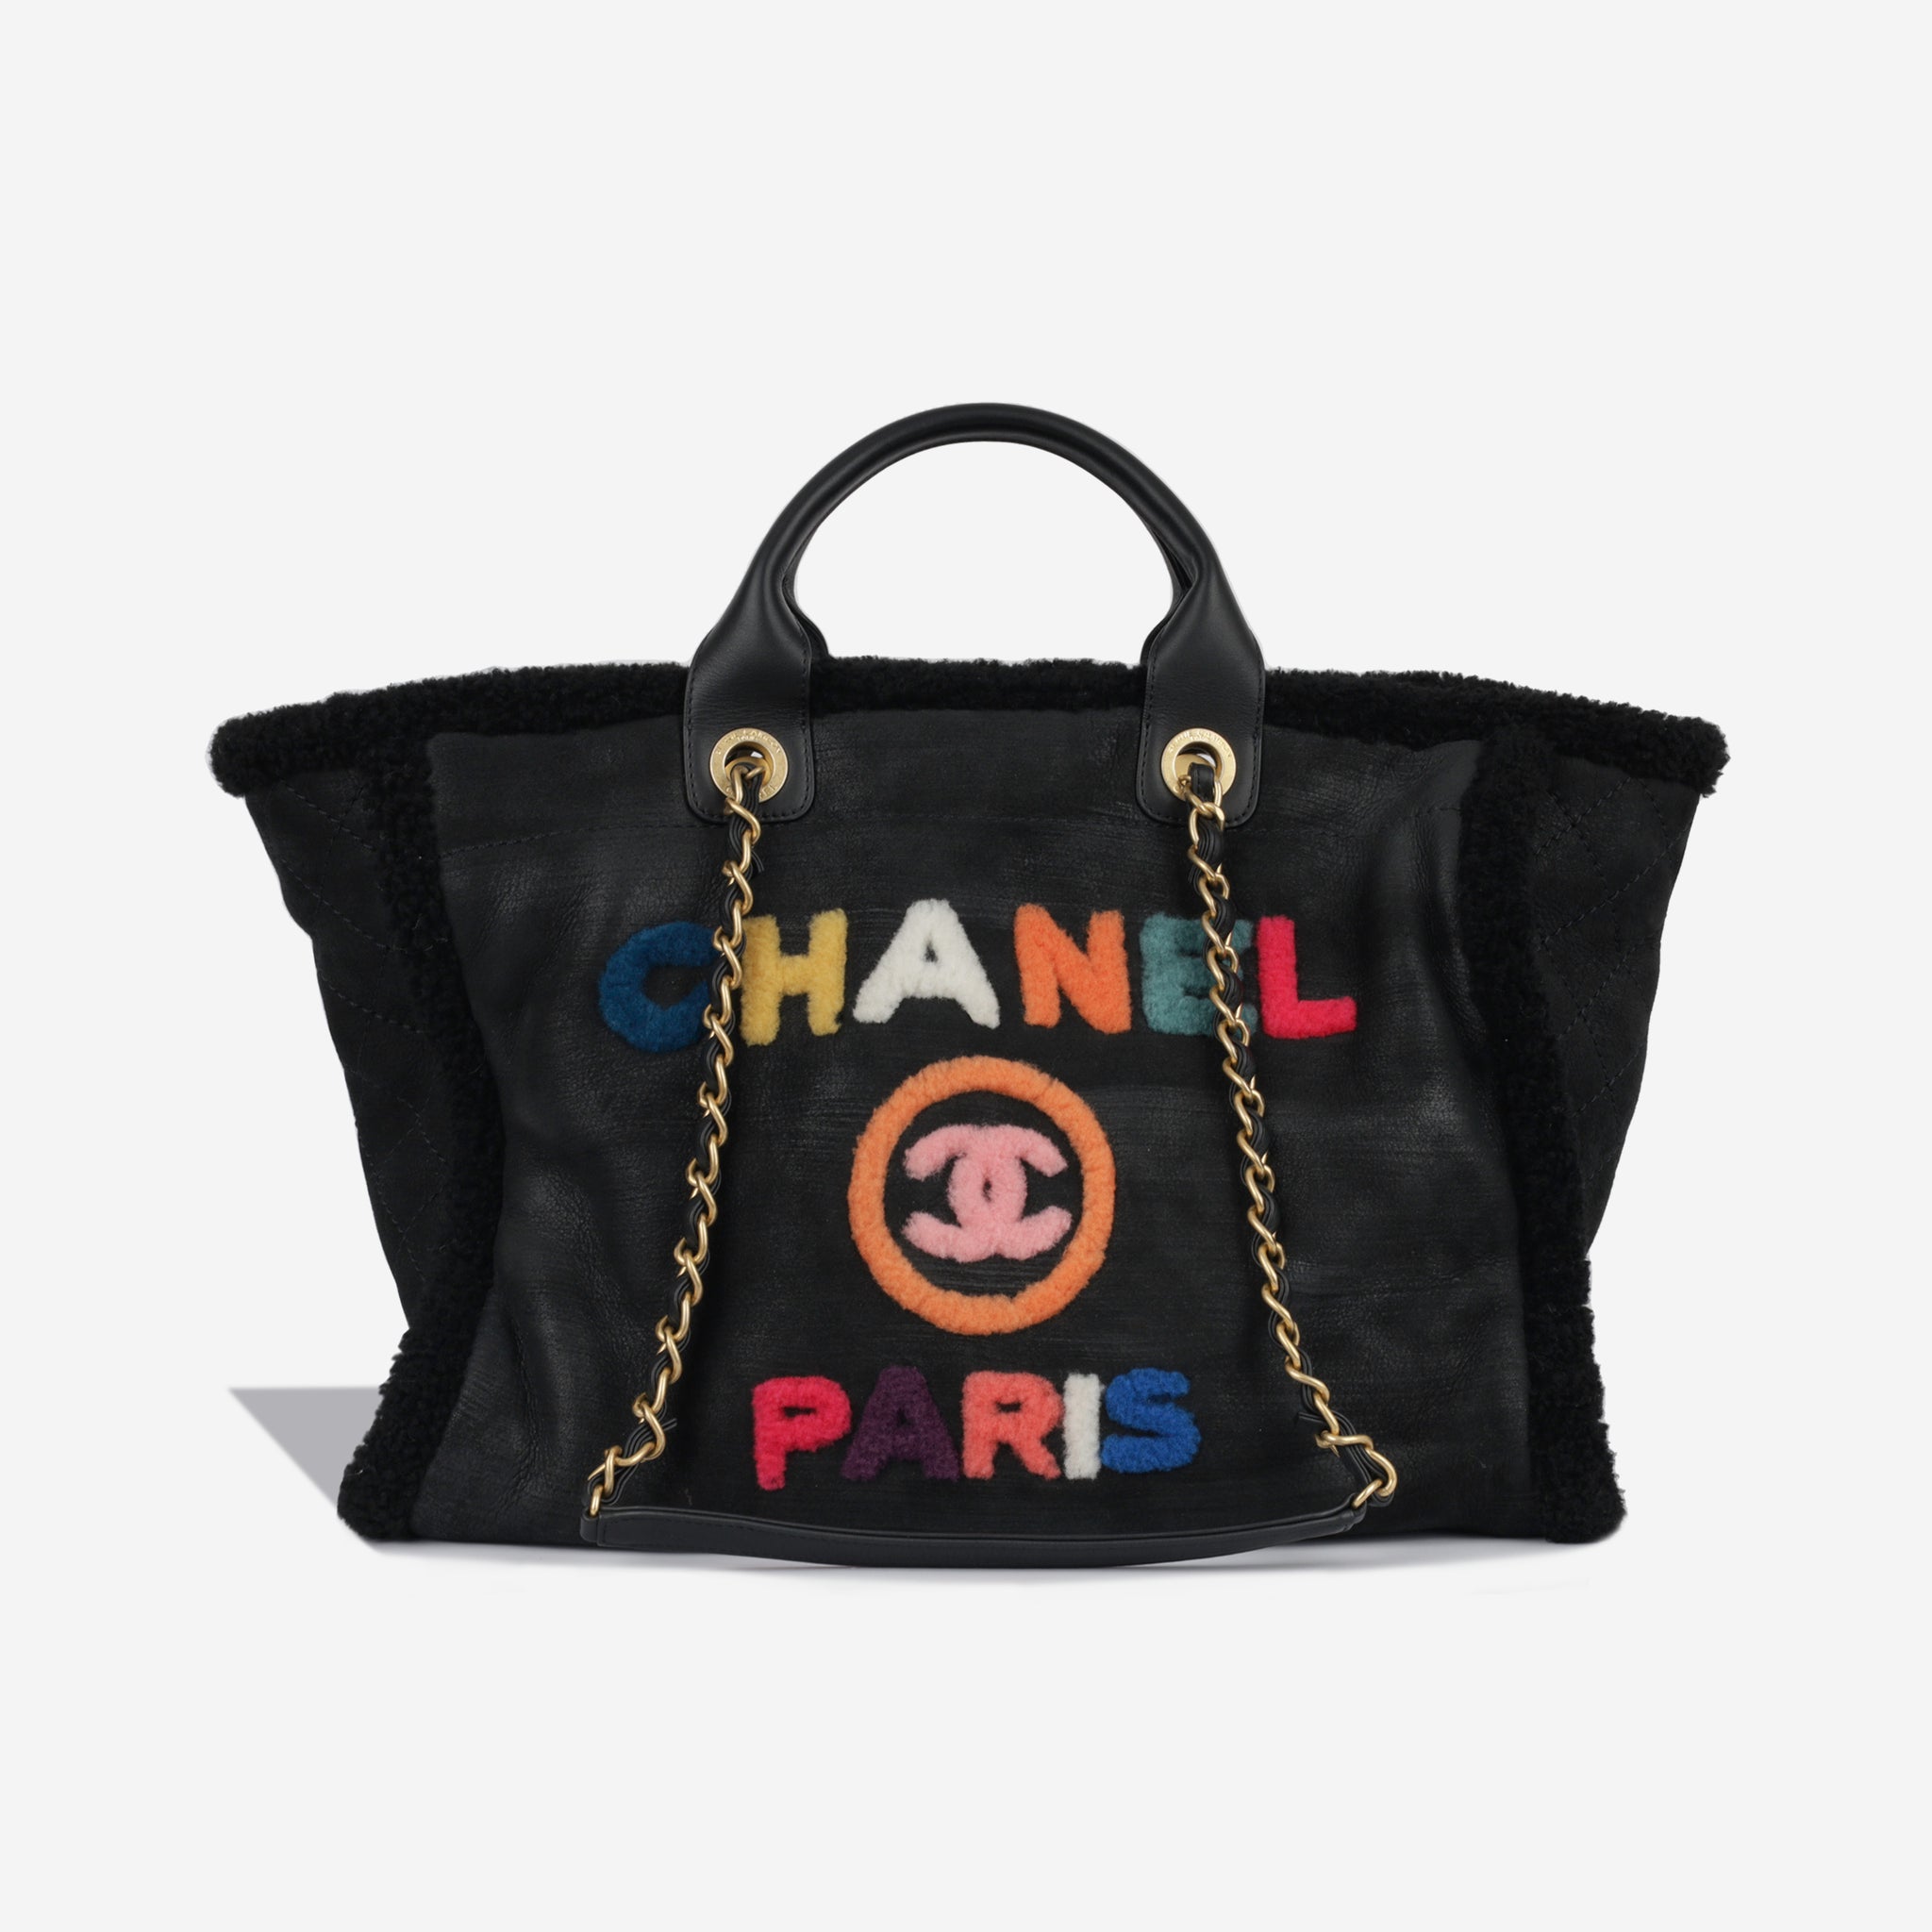 Chanel - Deauville - Large Tote - Black Shearling - Multi - GHW